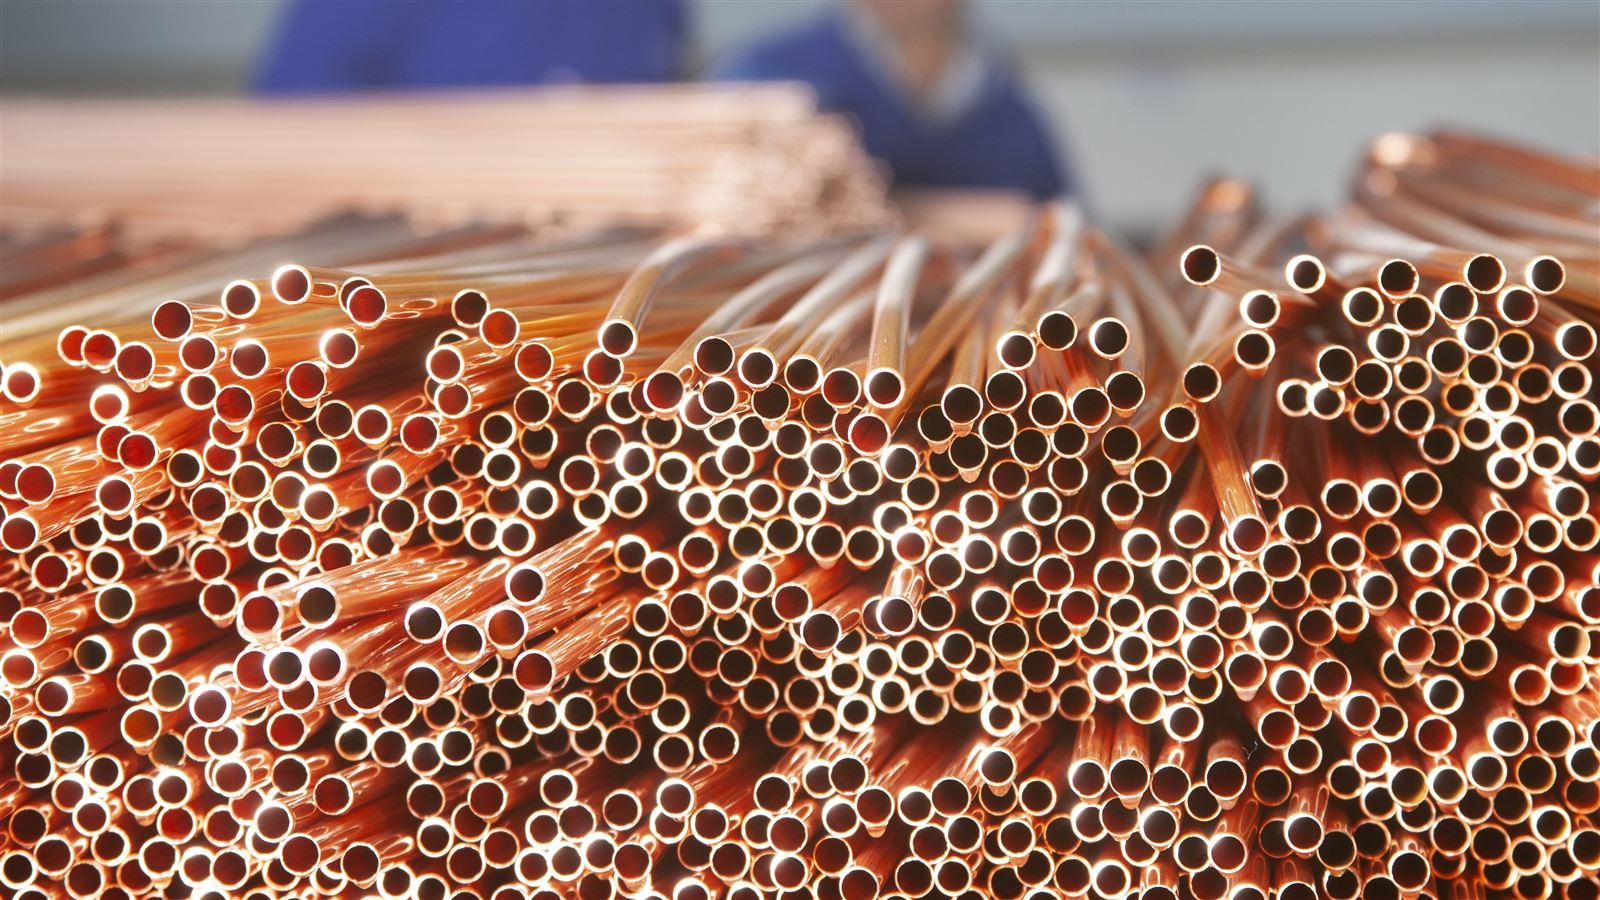 A large stack of freshly cut pipes